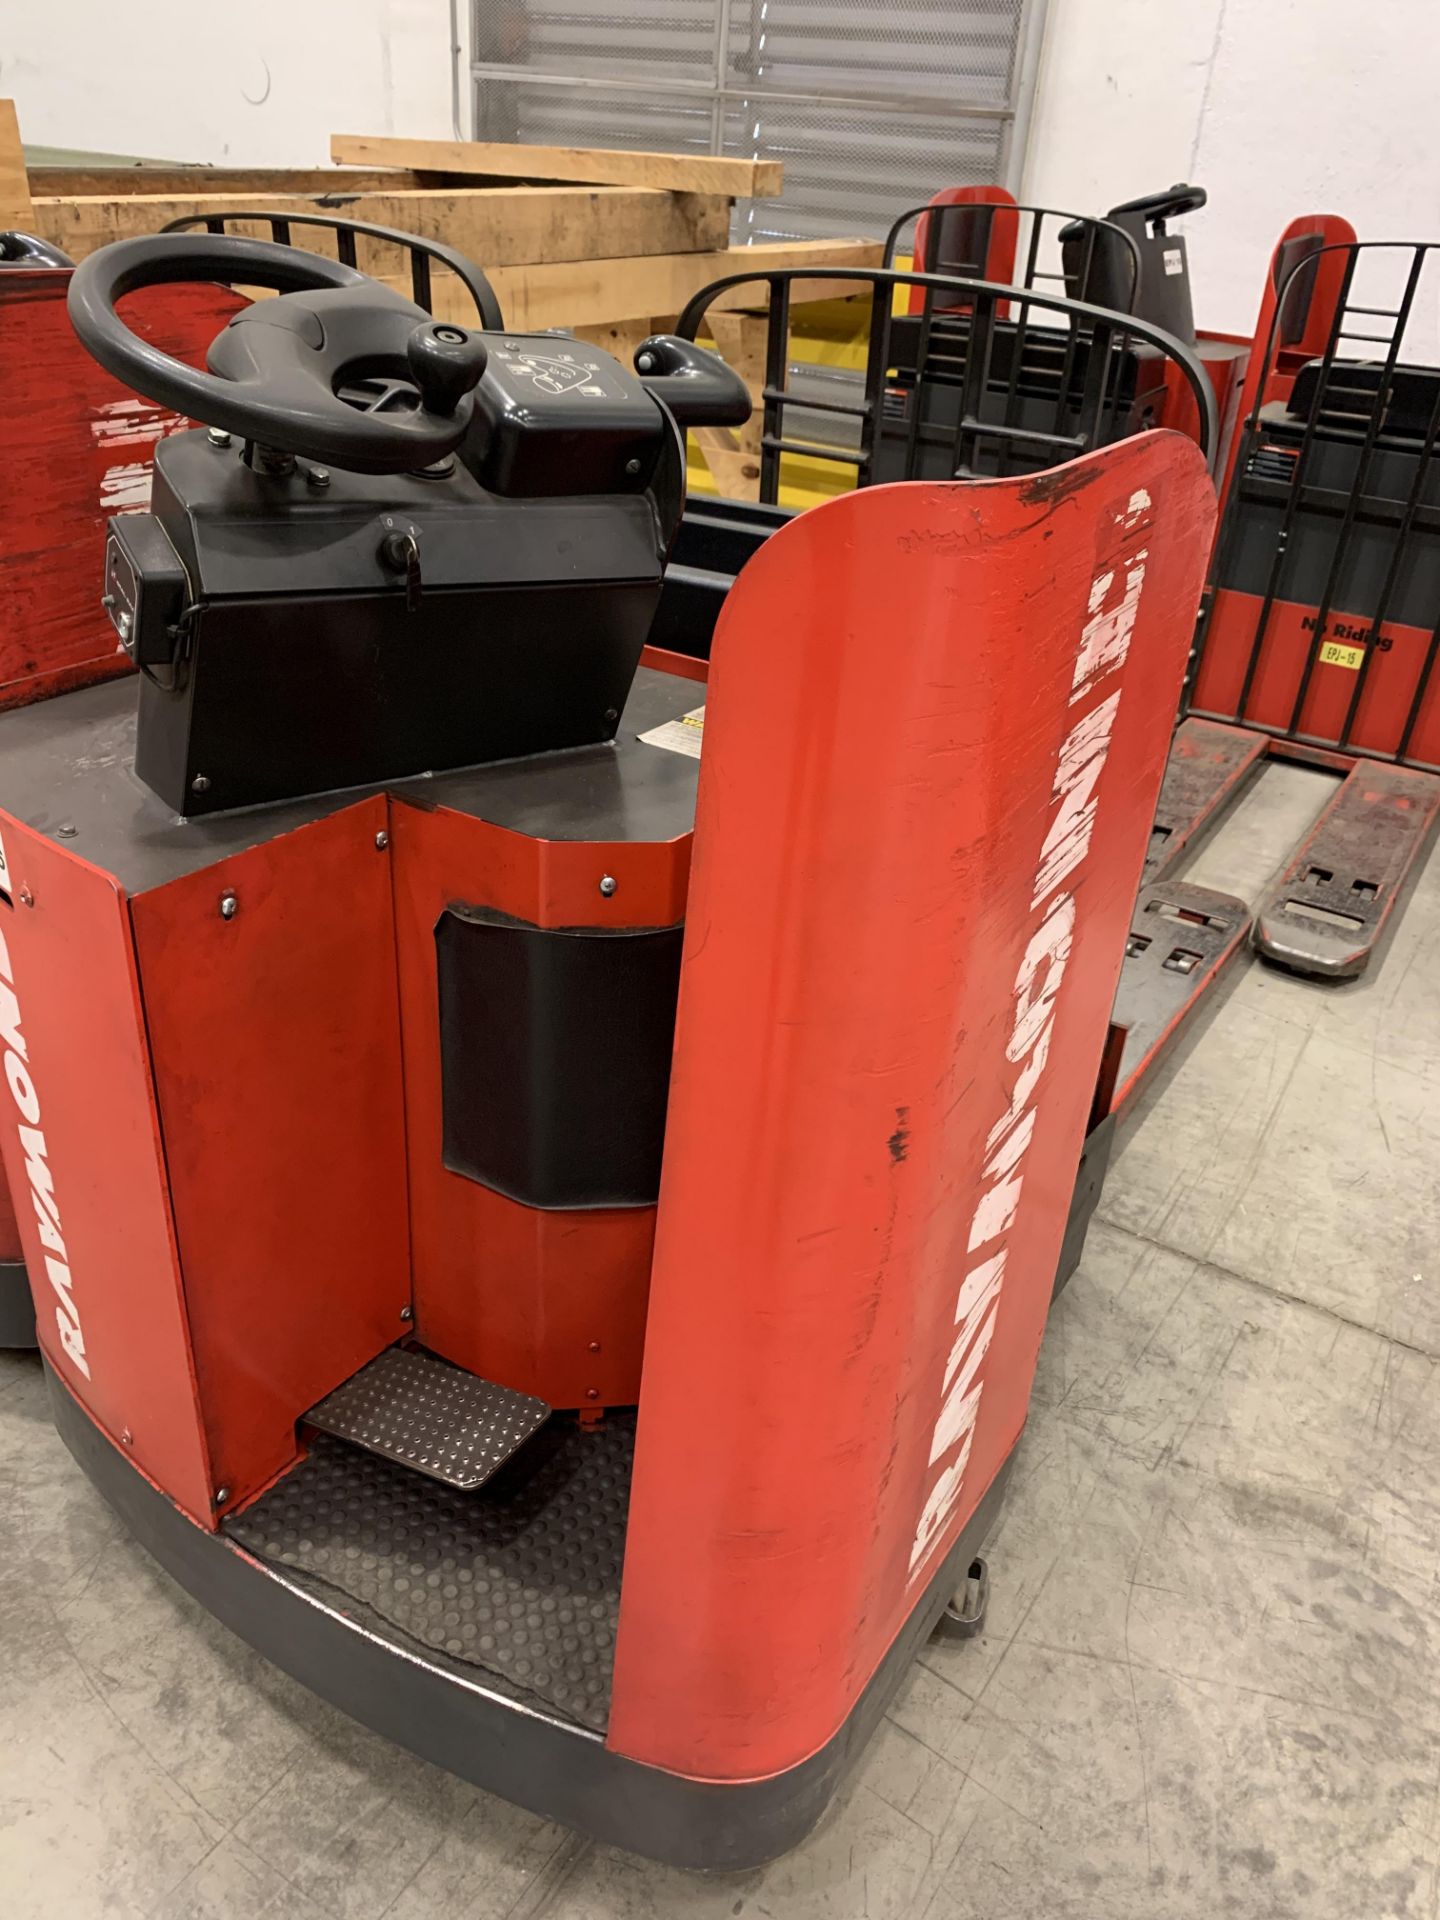 2004 RAYMOND 6,000-LB. CAPACITY ELECTRIC PALLET RIDER, MODEL 19F60L, S/N 019-04-55985, WITH 24-VOLT - Image 6 of 8